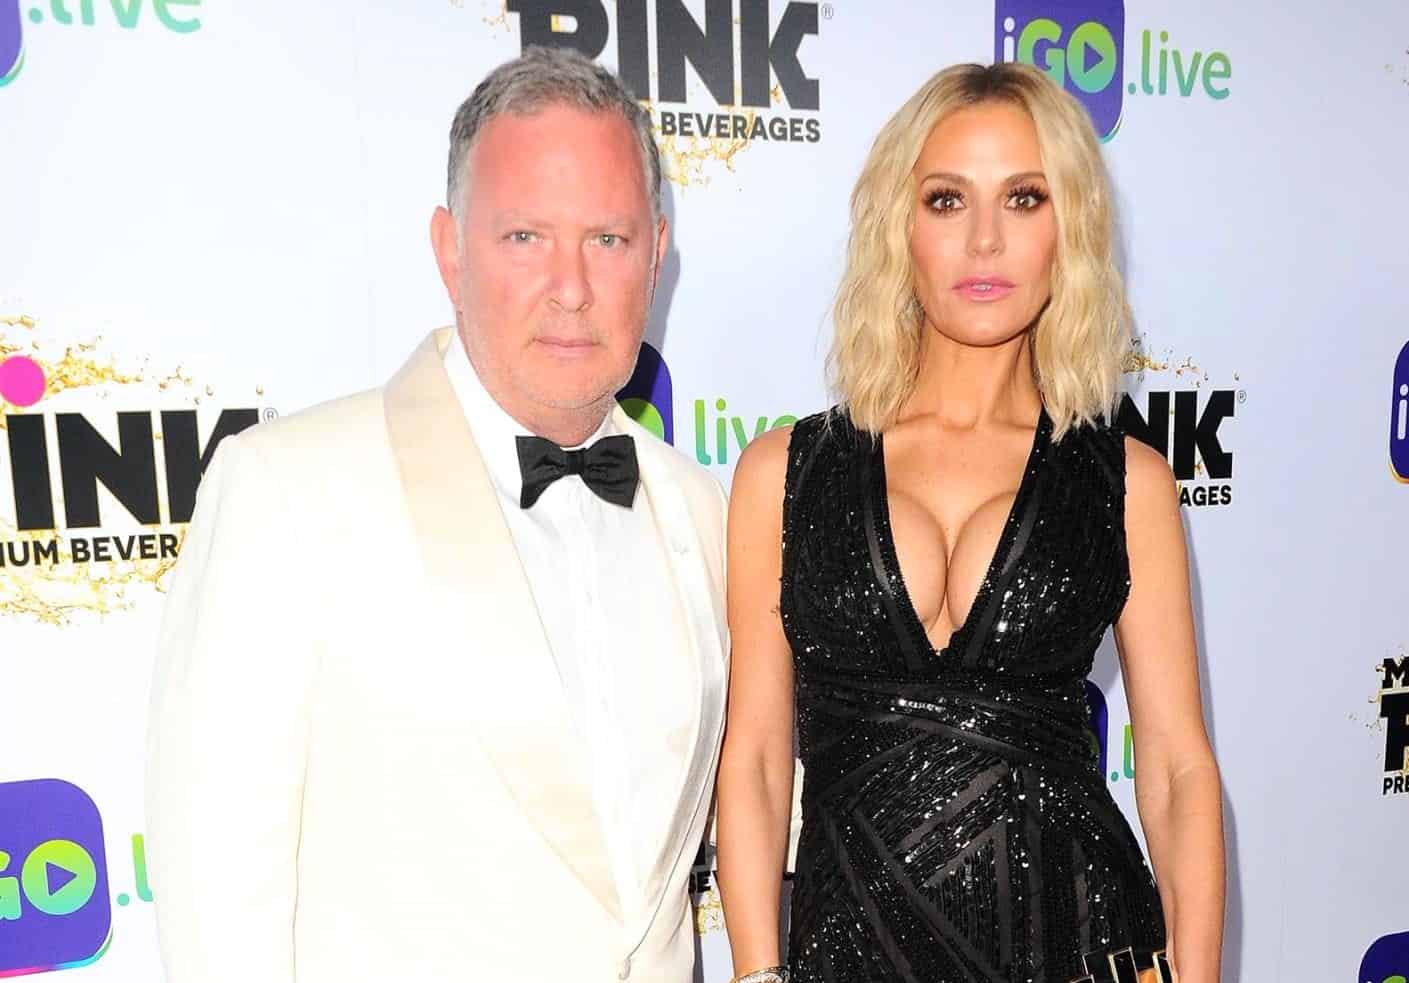 Dorit Kemsley's Husband PK Wins Lawsuit Over $75,000 Betting Debt as Judge Sides with Him